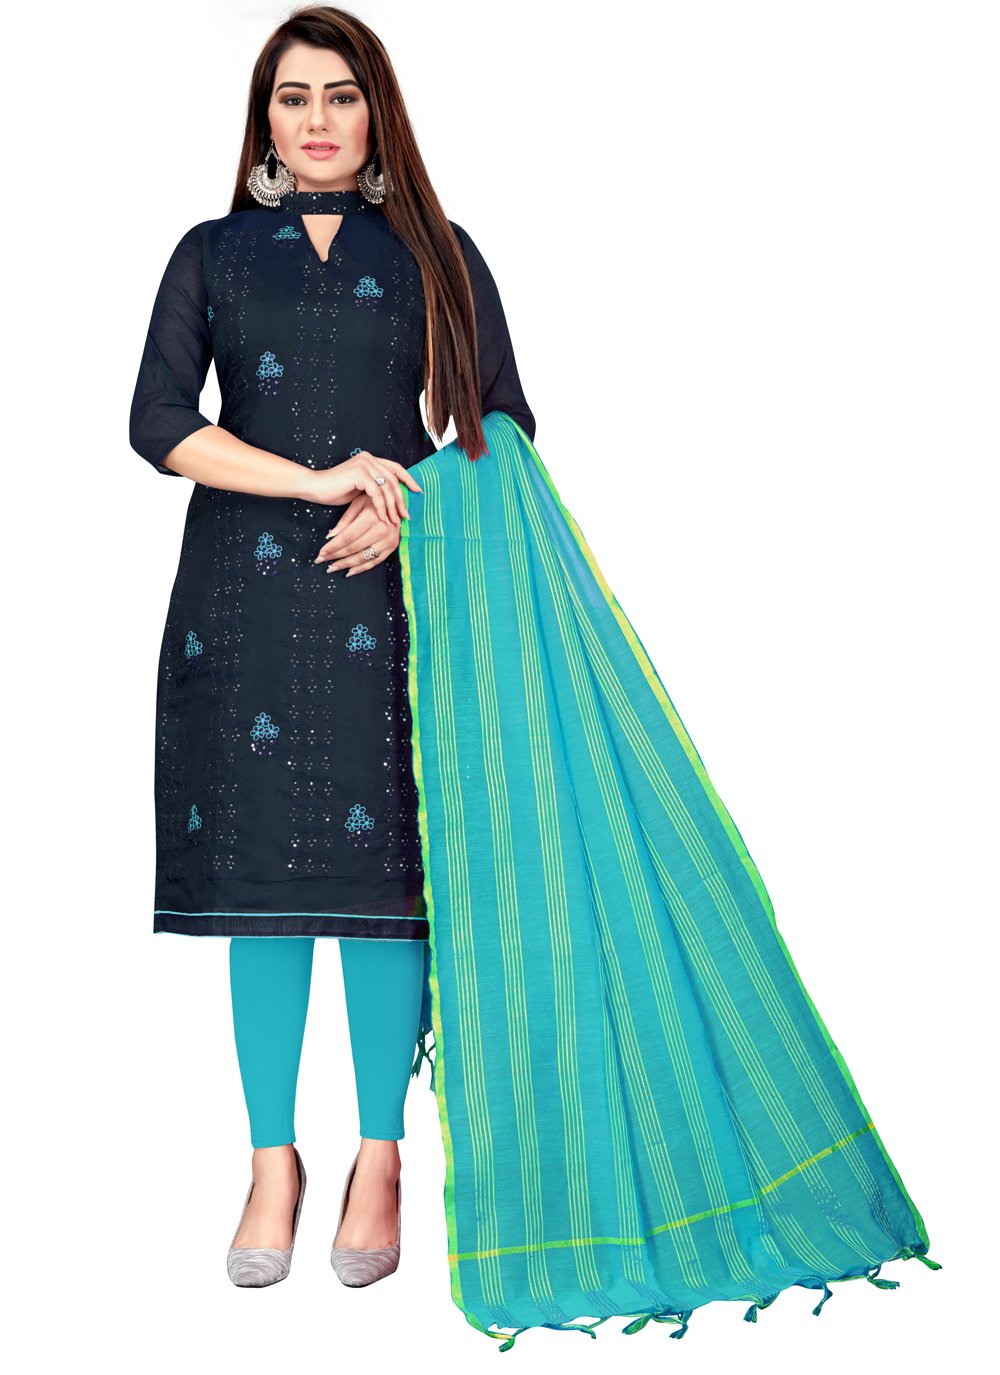 Chanderi Cotton Embroidered Churidar Suit in Navy Blue